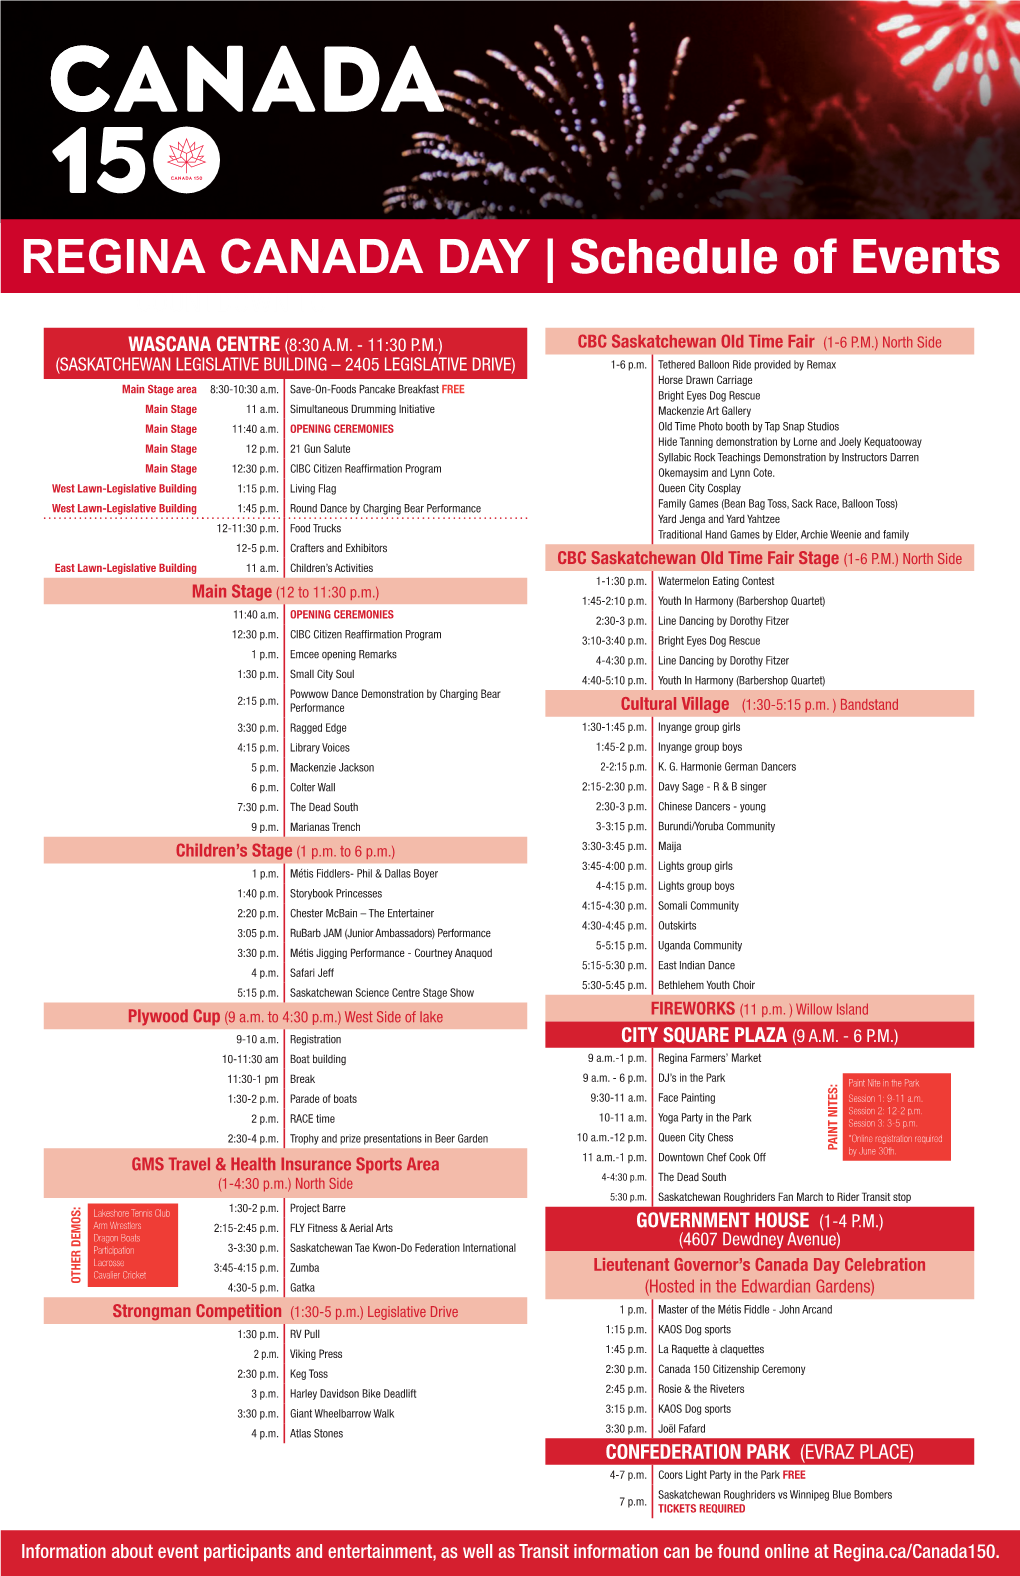 REGINA CANADA DAY | Schedule of Events COUNTDOWN TO